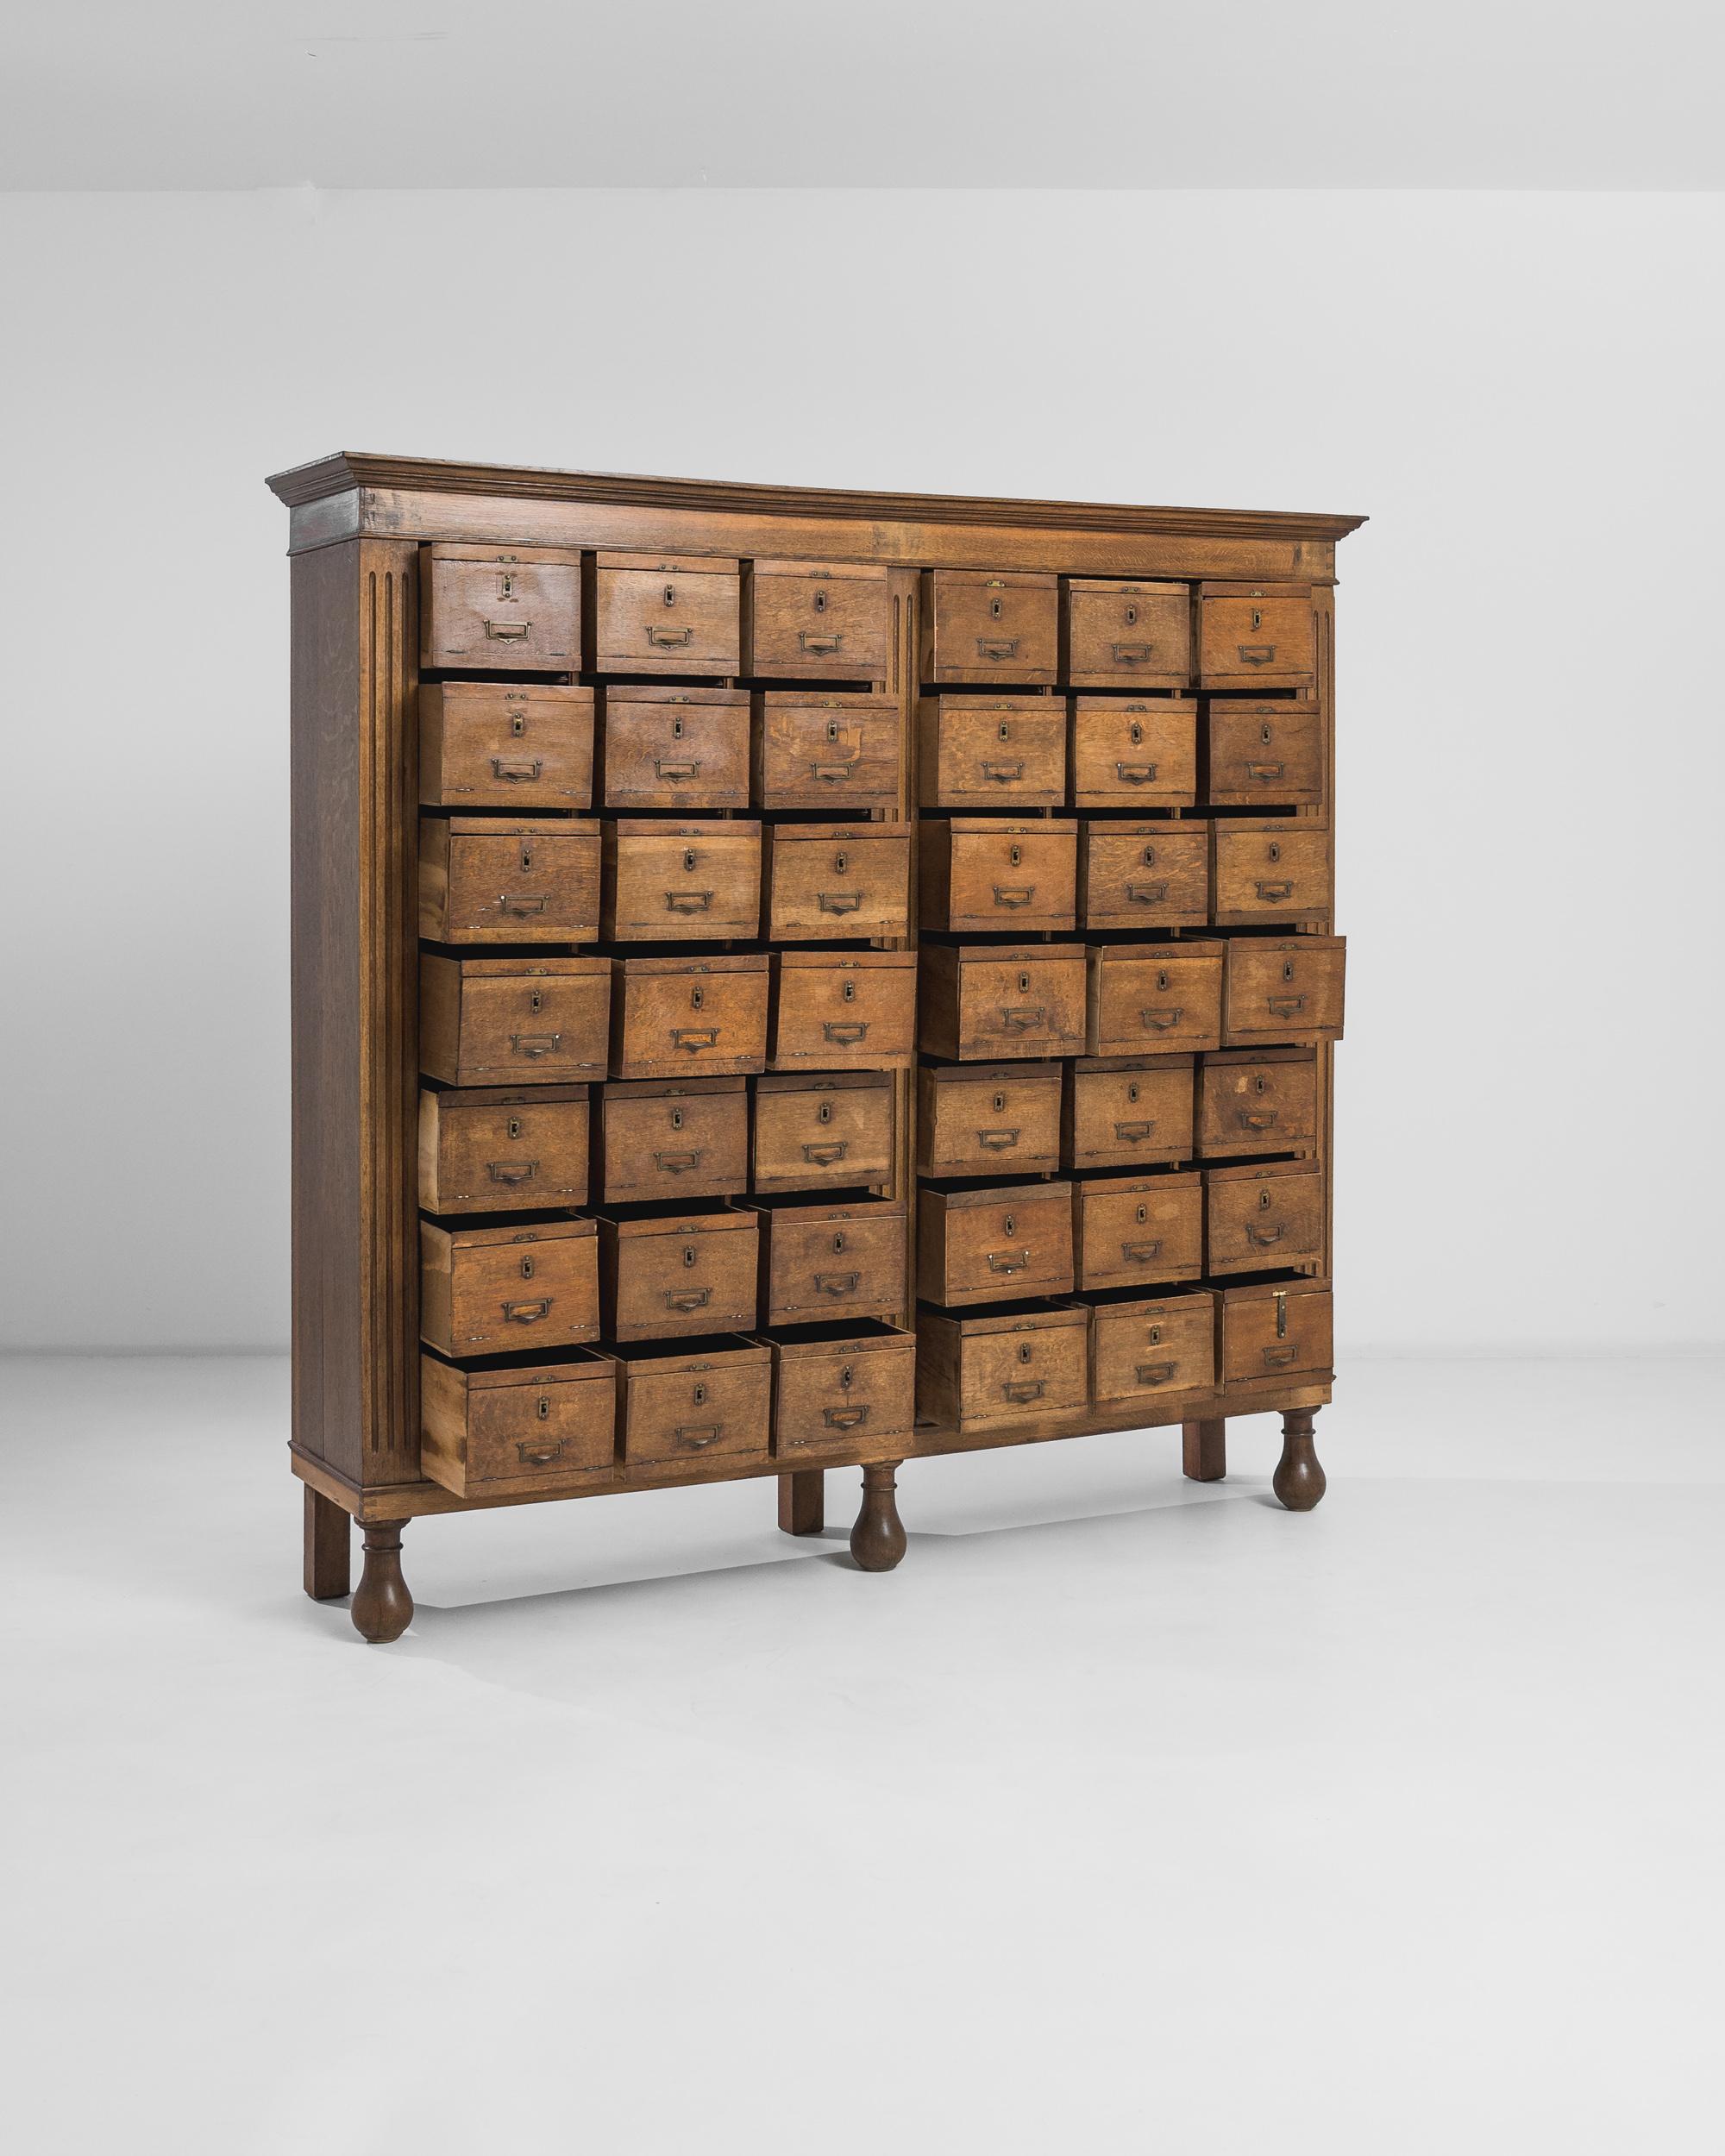 Early 20th Century Antique French Oak Pidgeon Hole Filing Cabinet